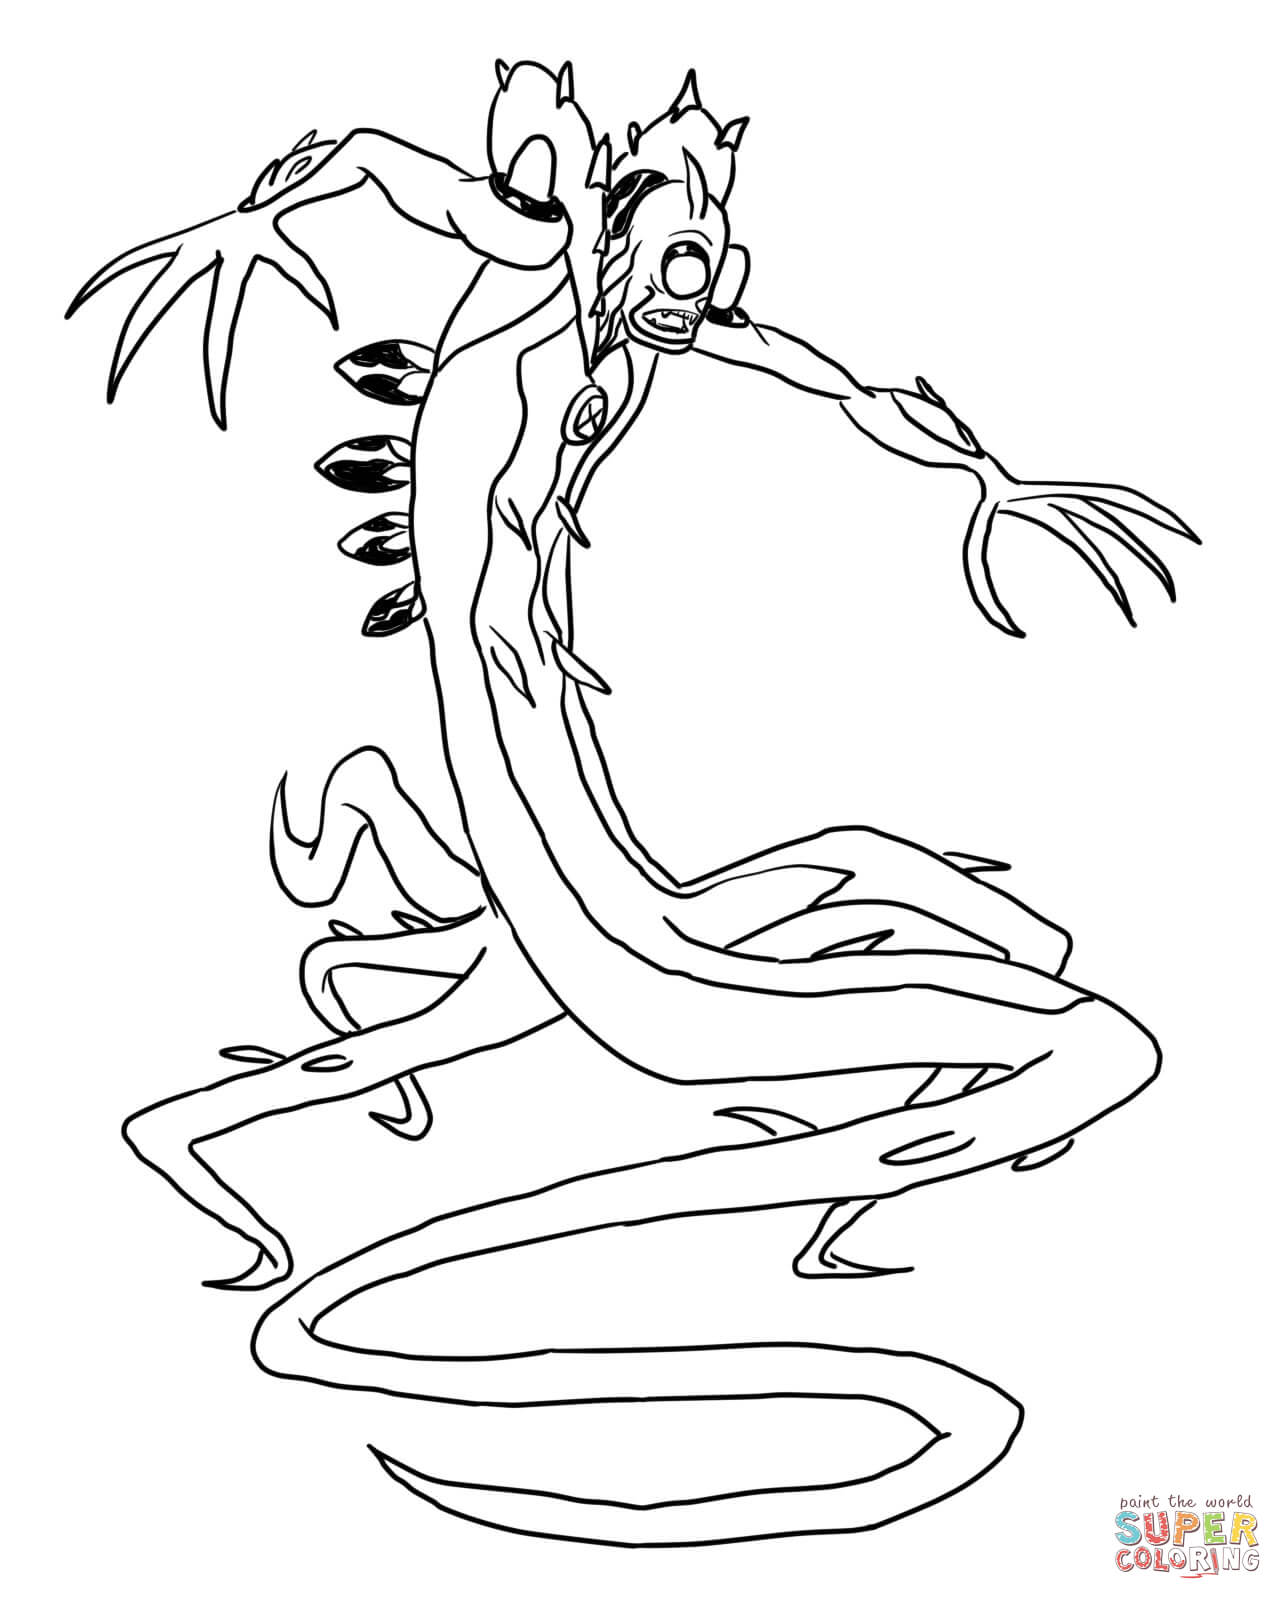 Cartoon Ben 10 Coloring Pages for Adult